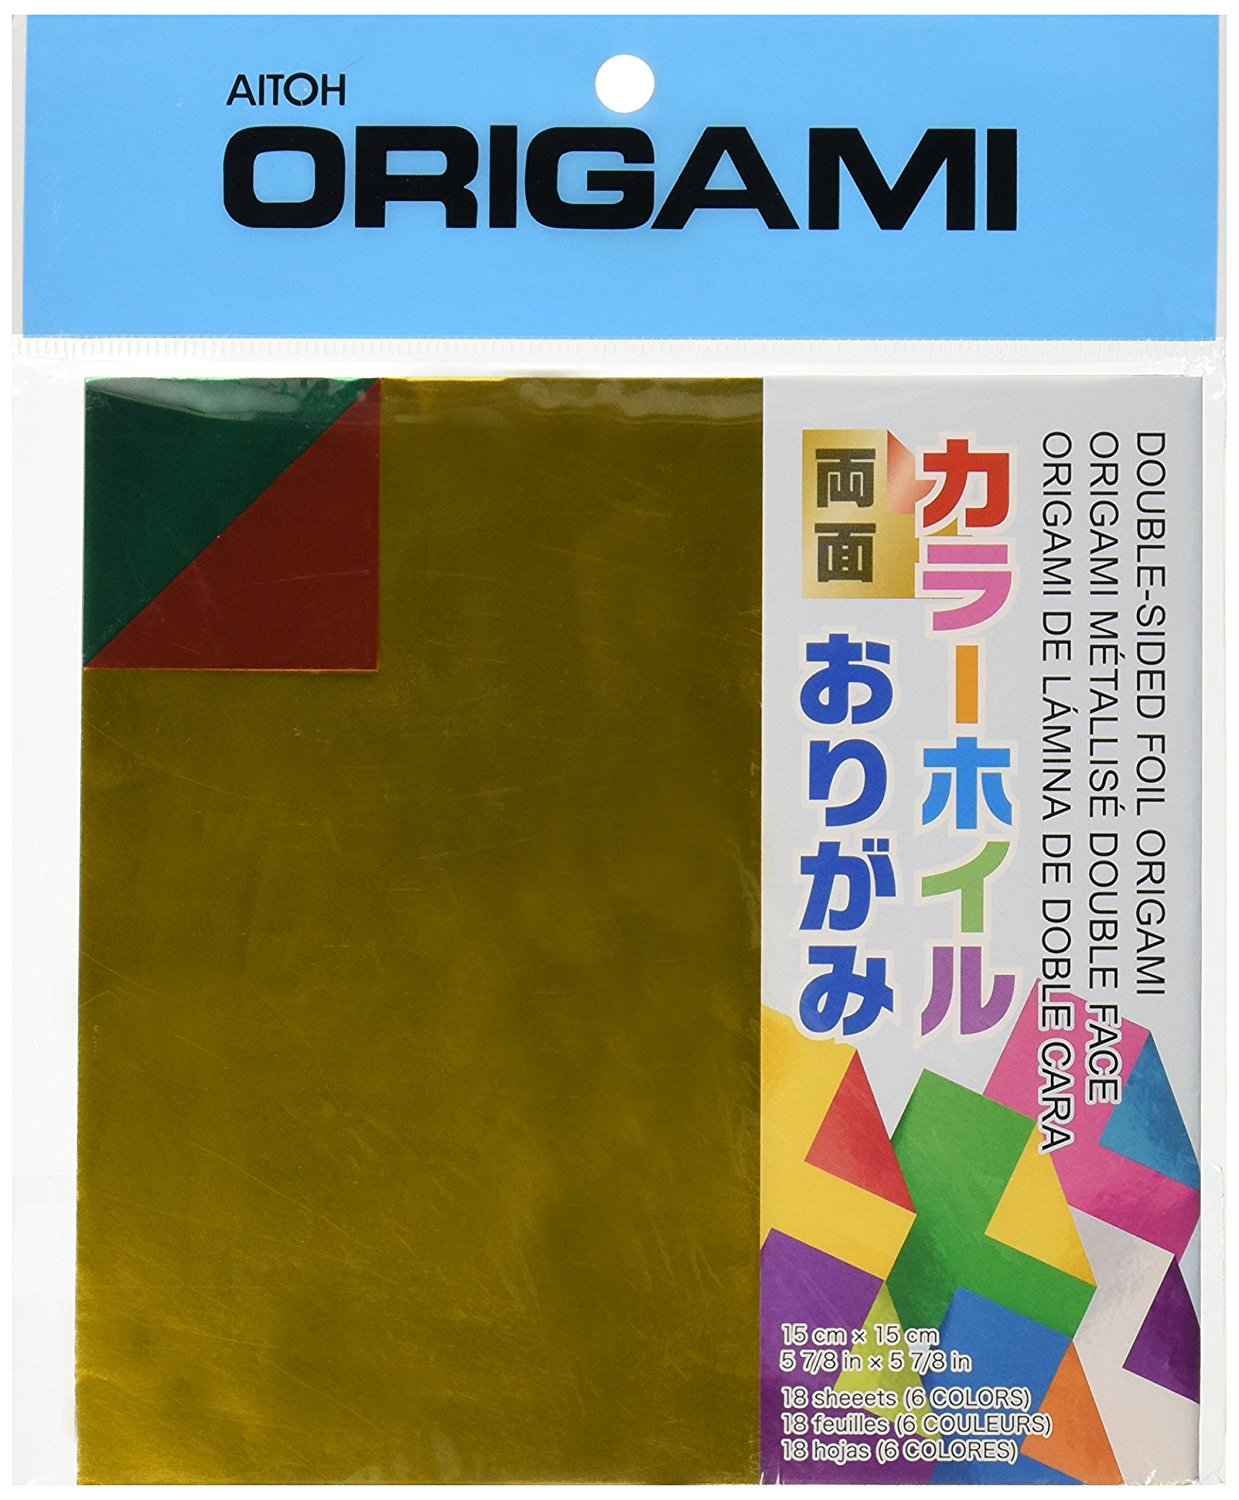 Aitoh DSF-2 Double Sided Foil/Foil Origami Paper, 6 Inch Square, 18 Sheets